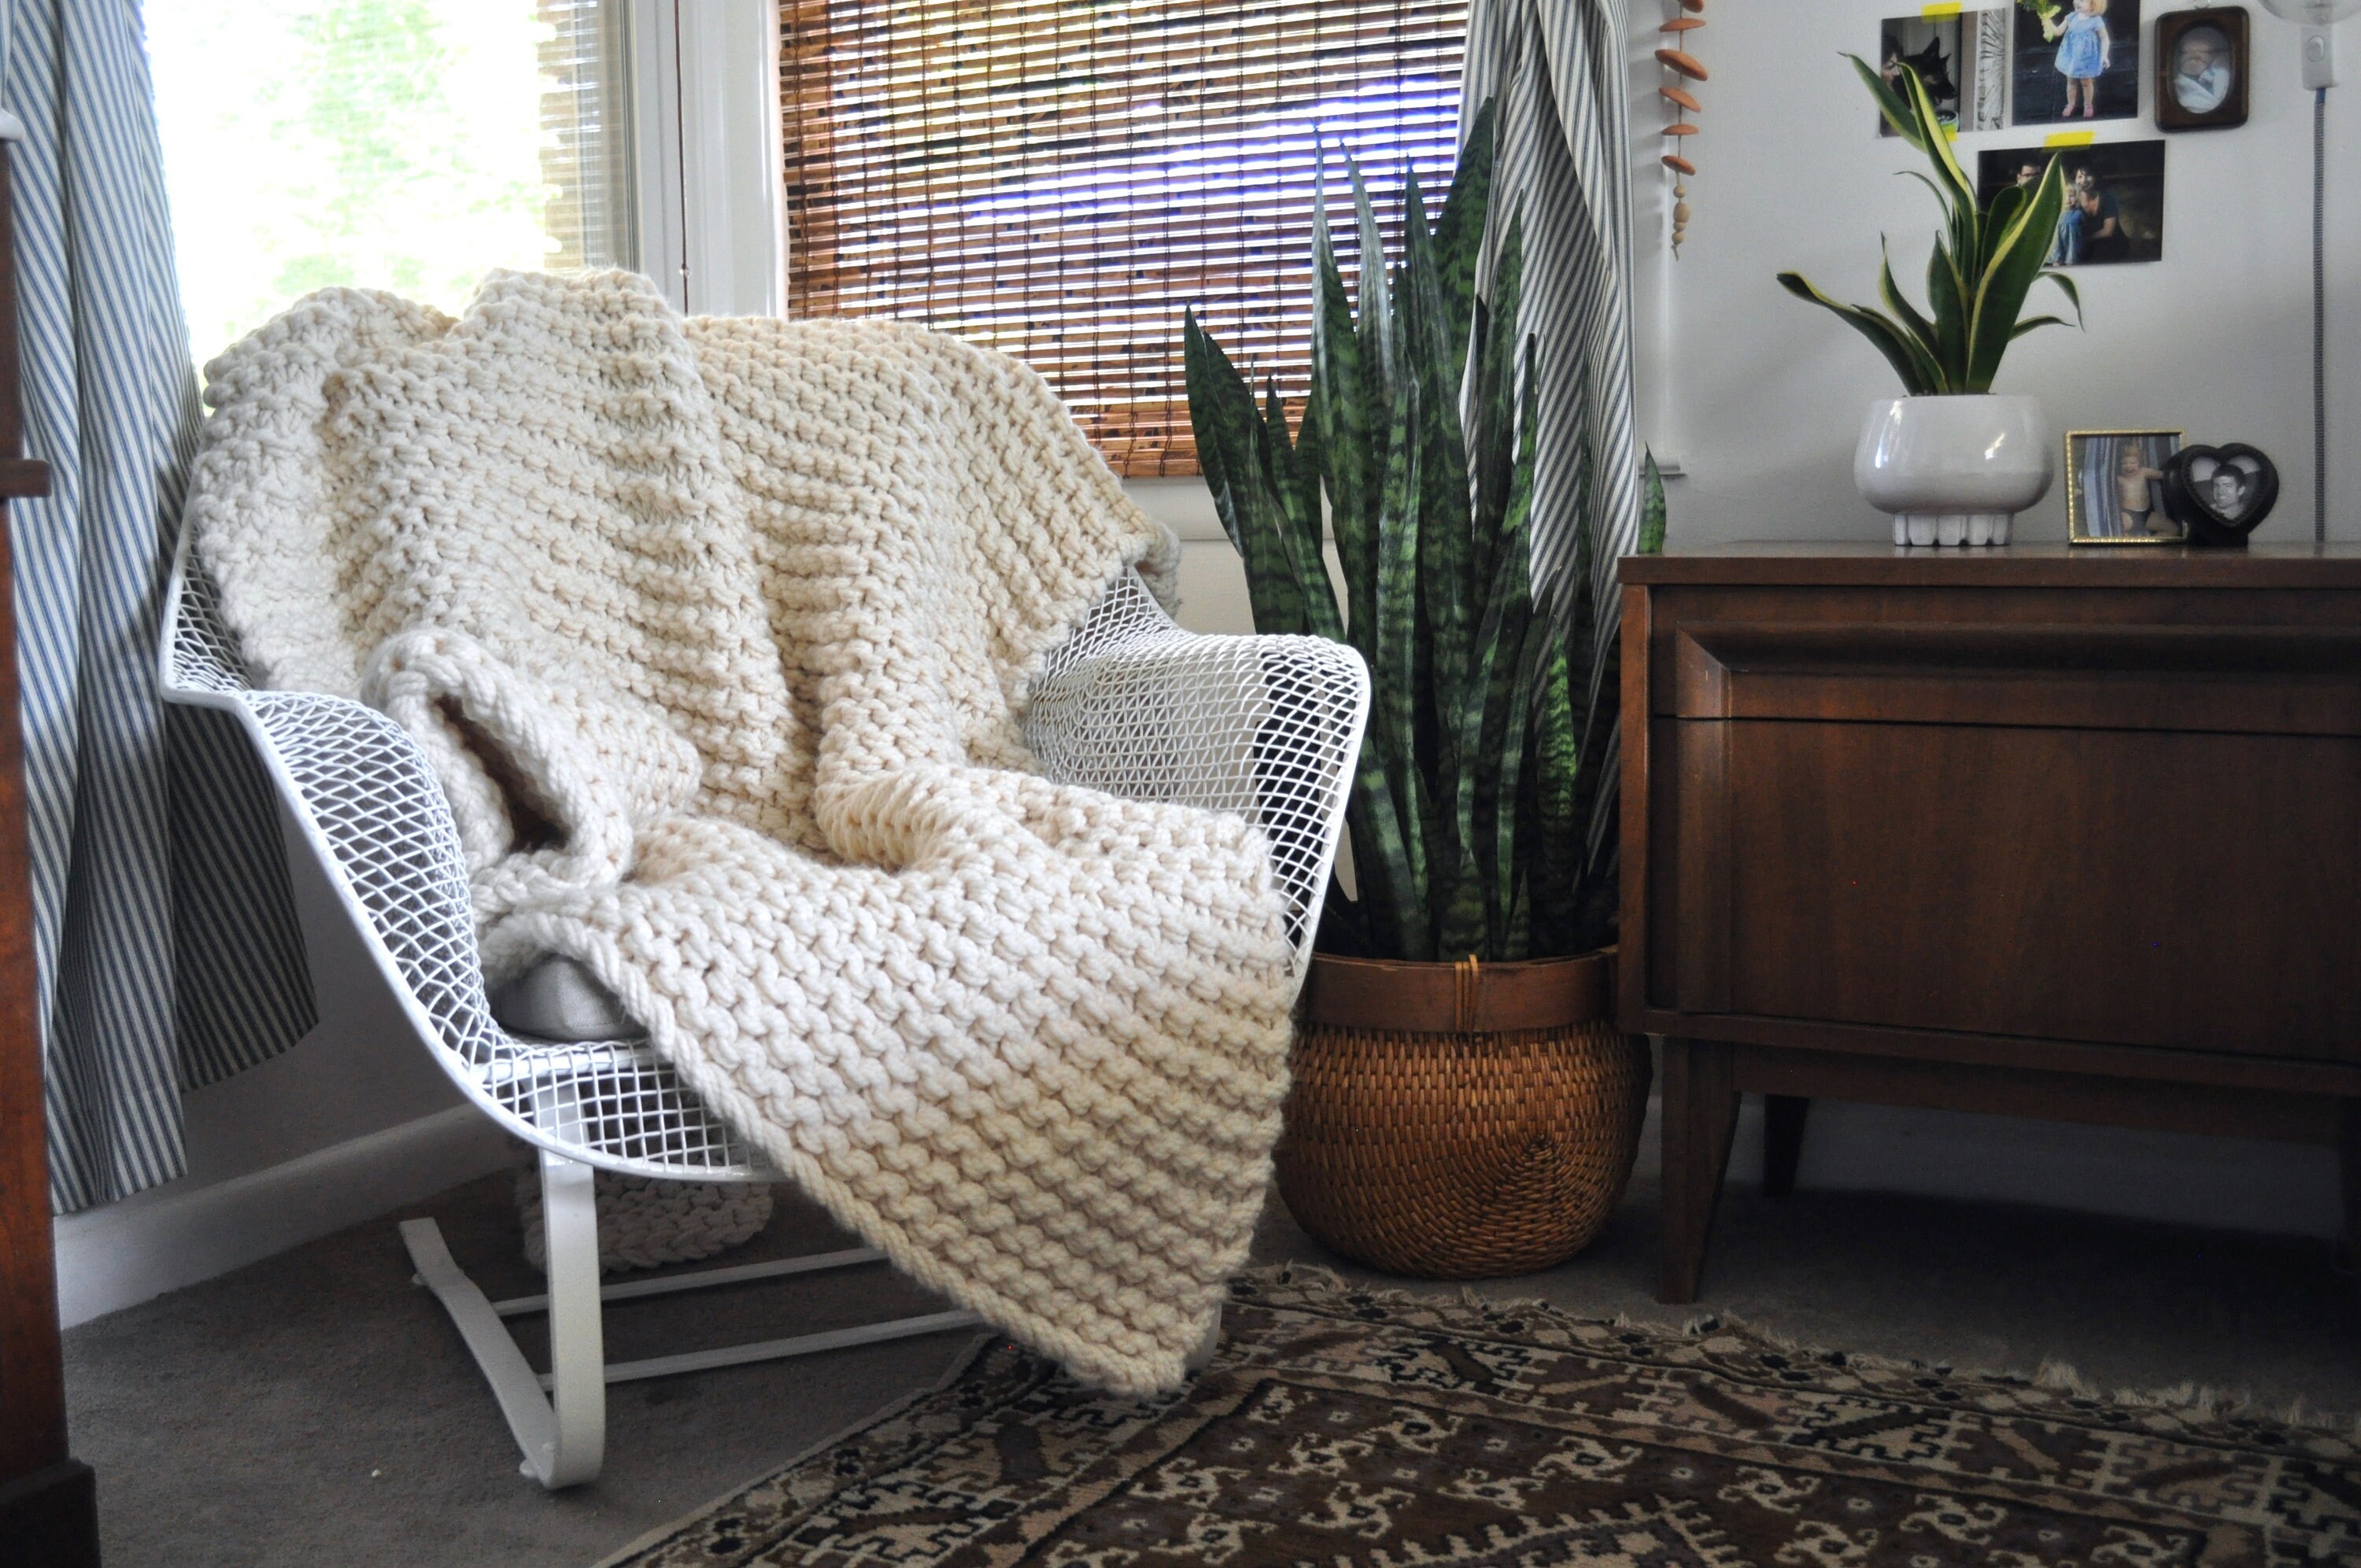 30 Easy Chunky Knitted Blanket Patterns - Frosting and Confetti